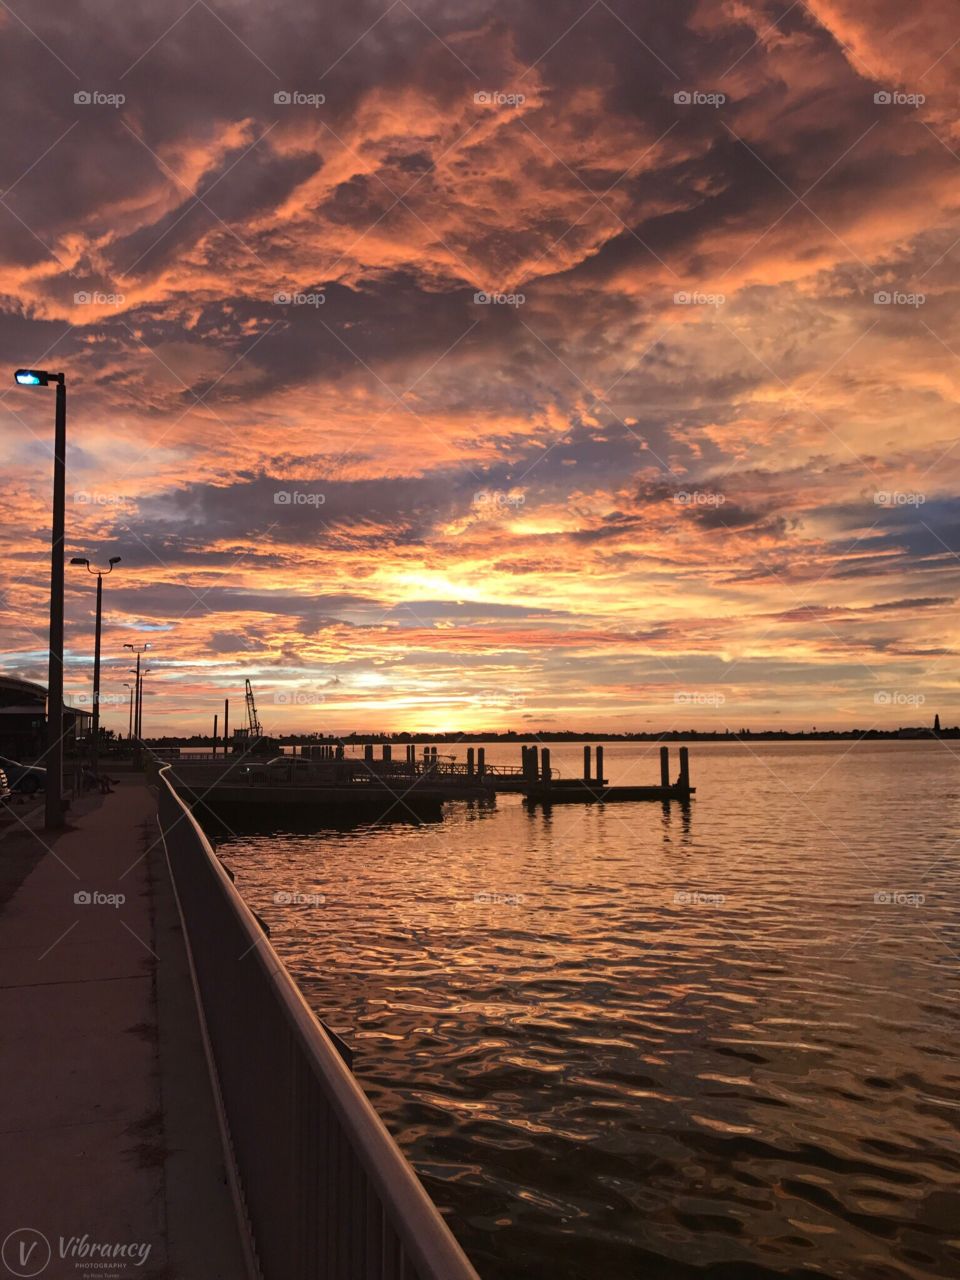 A view of the fishing pier at sunset with the sunlight reflecting orange and yellow in the clouds